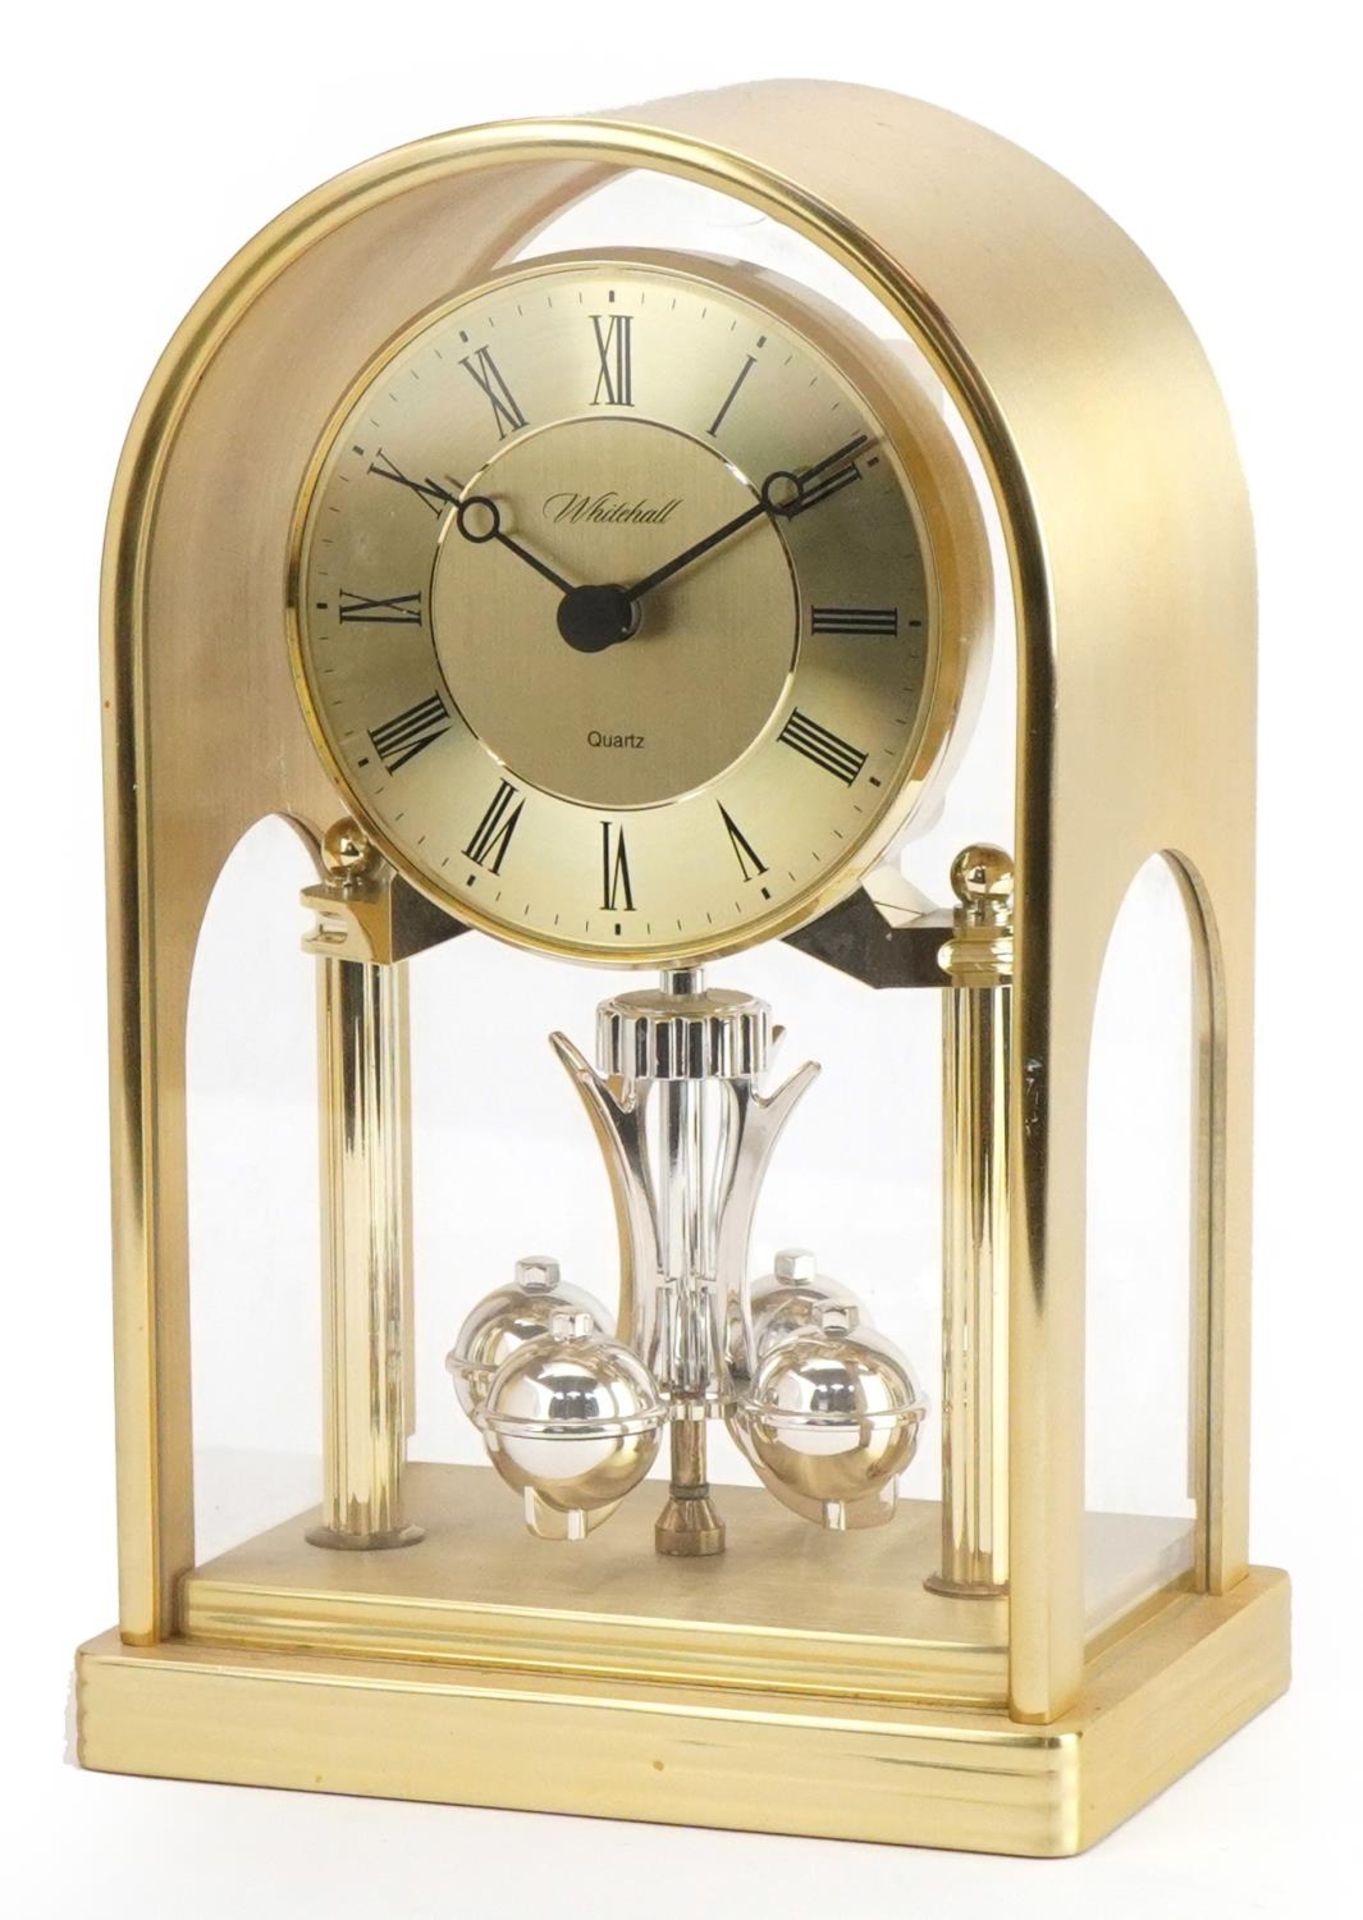 Whitehall quartz dome top anniversary clock, 20cm high : For further information on this lot